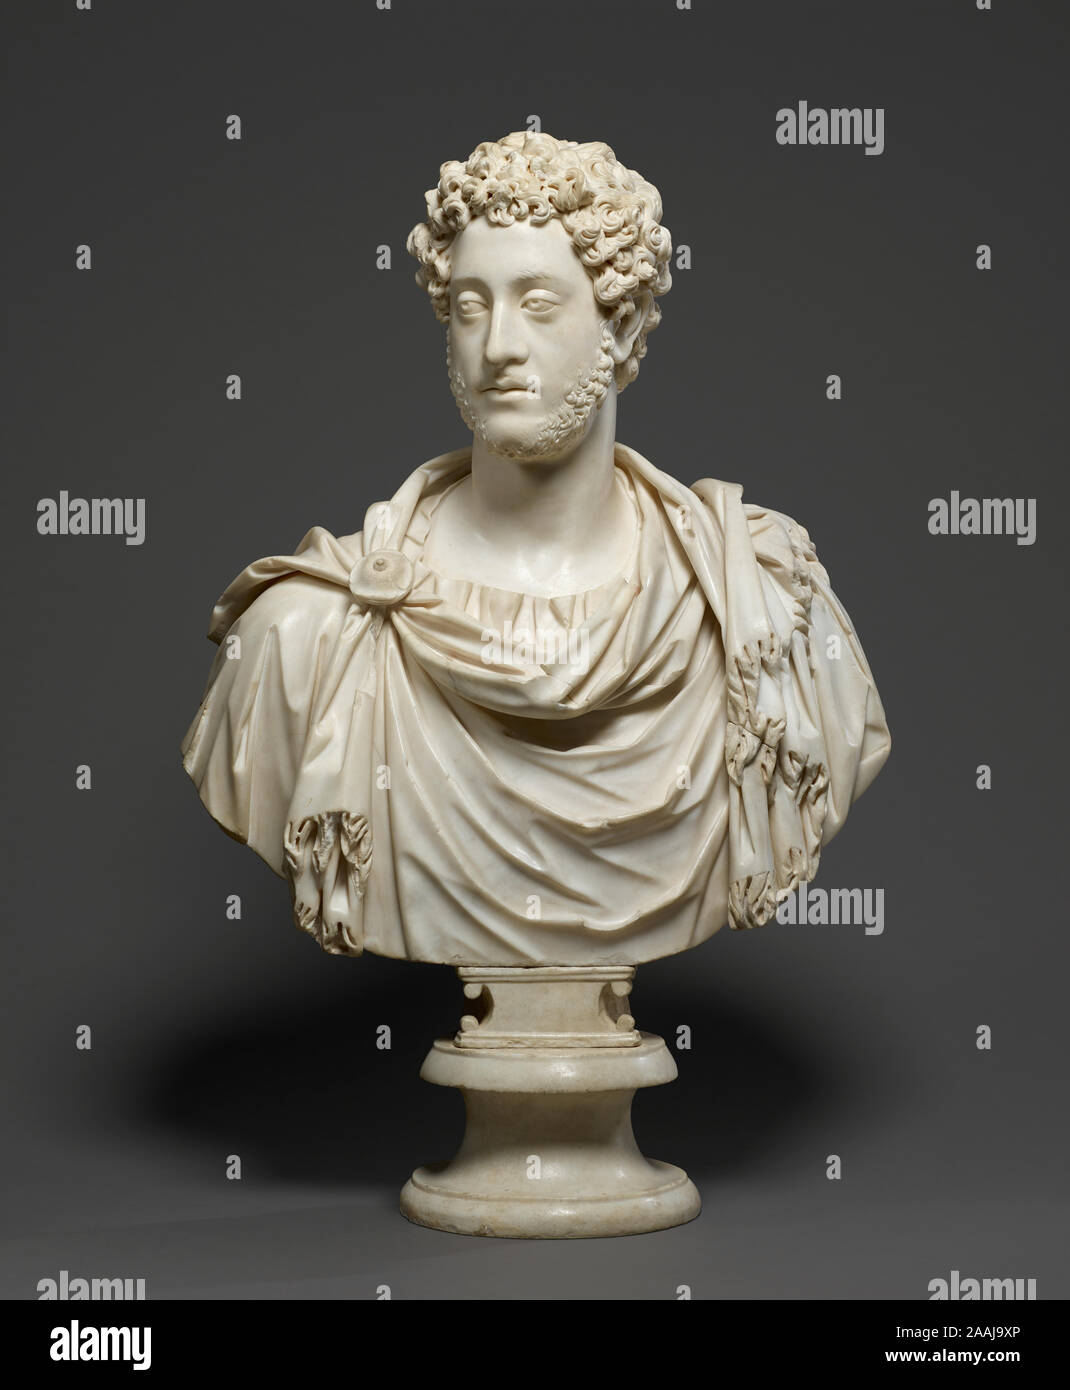 Bust of Emperor Commodus; Unknown maker, Roman; Rome, Italy, Europe; 180 - 185; Marble; 69.9 × 61 × 22.8 cm, 92.9874 kg (27 1/2 × 24 × 9 in., 205 lb.); 92.SA.48 Stock Photo